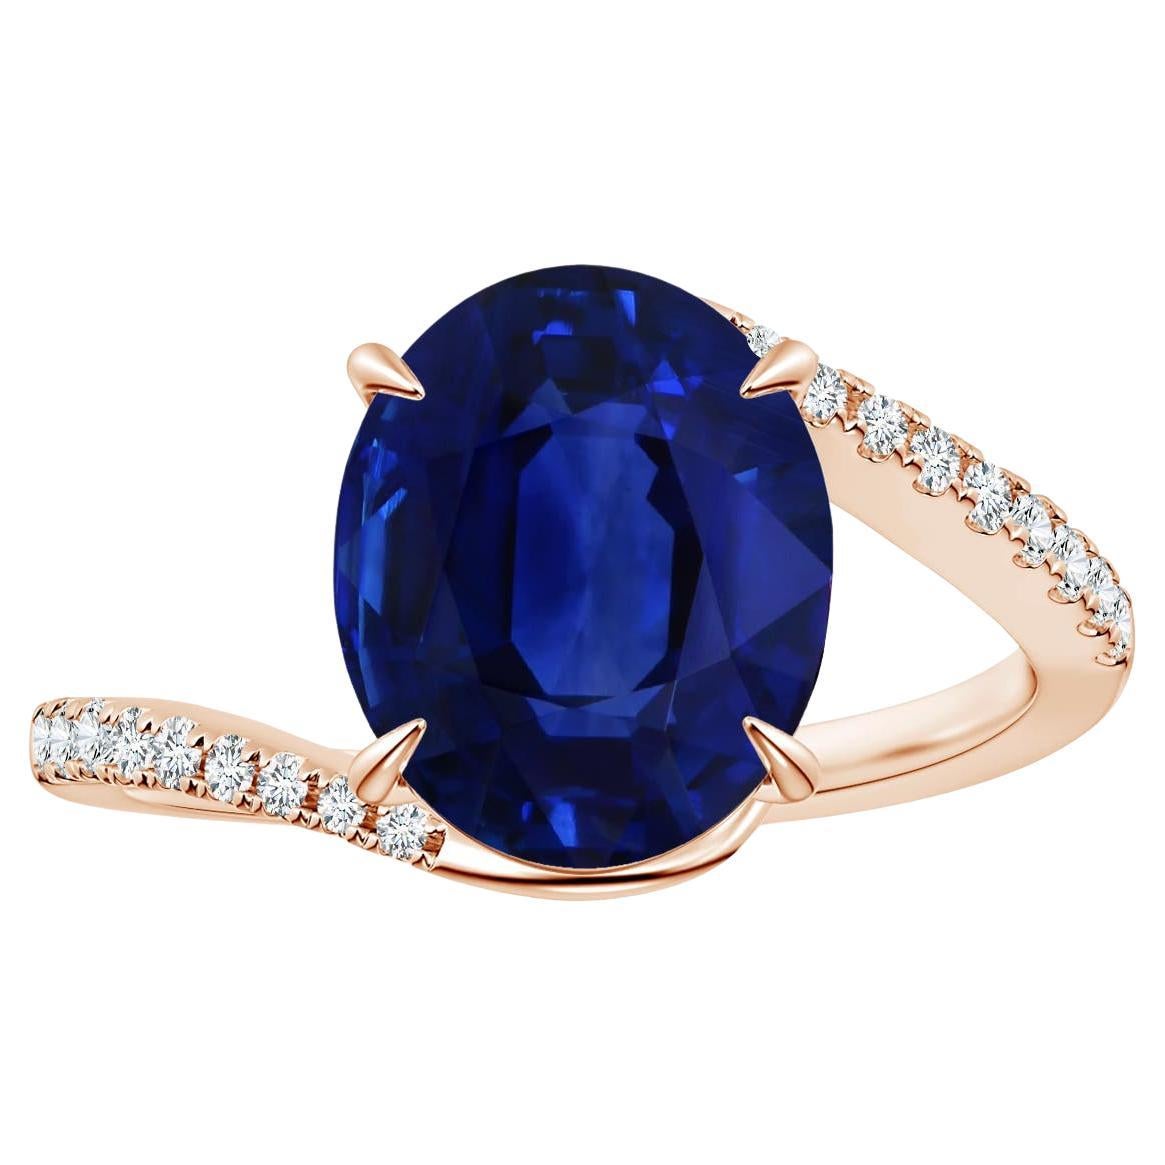 For Sale:  Angara Gia Certified Natural Blue Sapphire Ring in Rose Gold with Diamonds